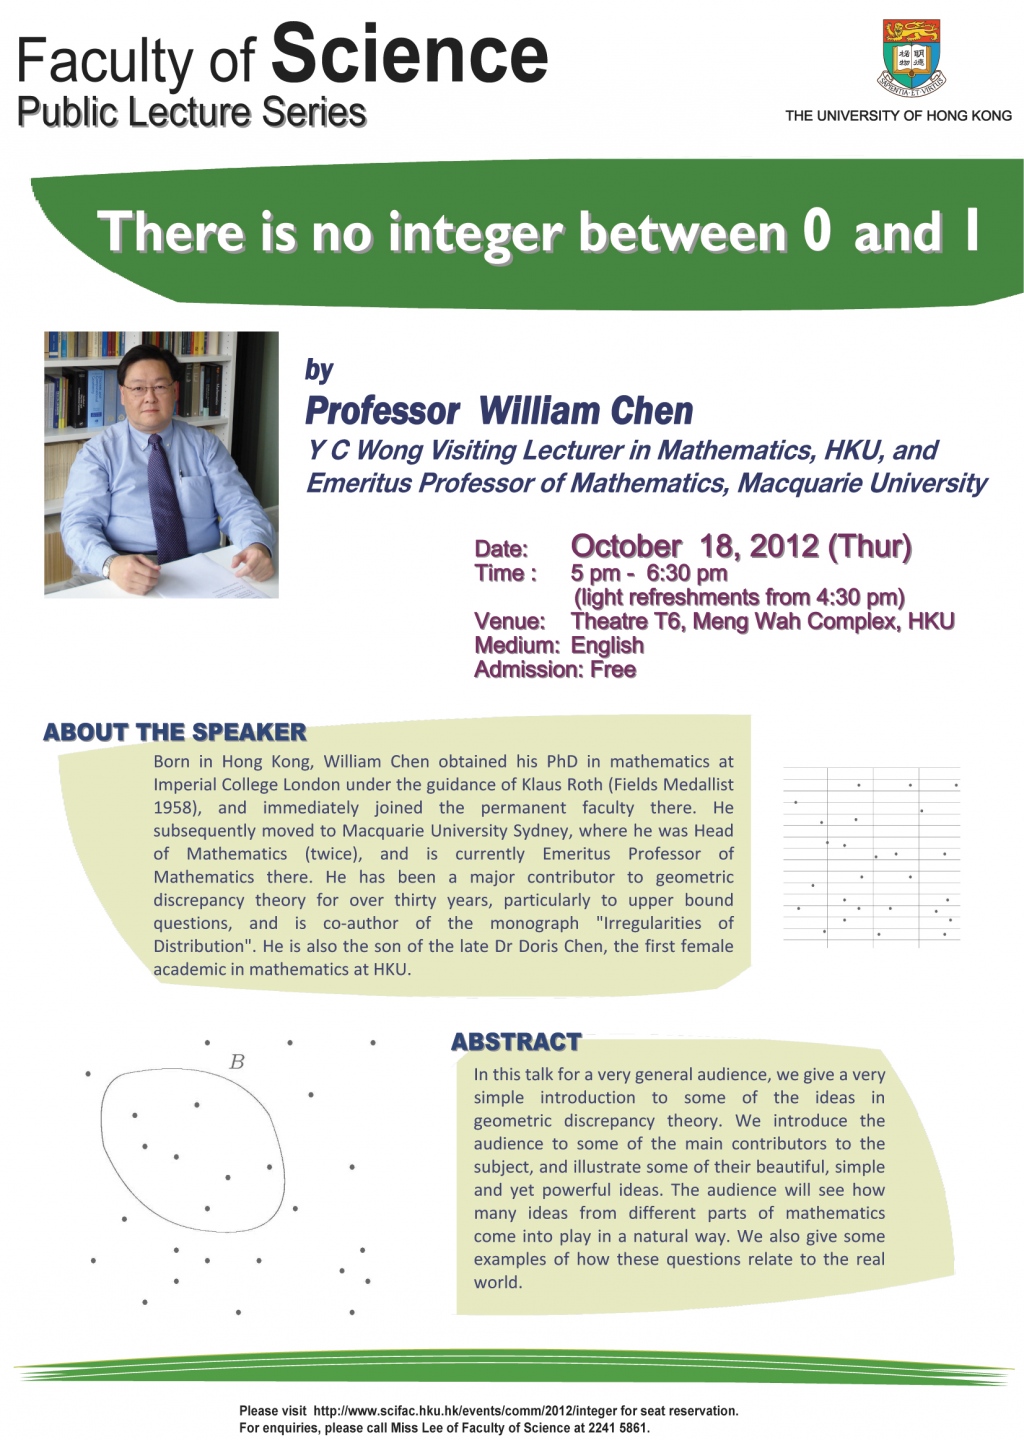 Public lecture by Y C Wong Visiting Lecturer in Mathematics: There is no integer between 0 and 1